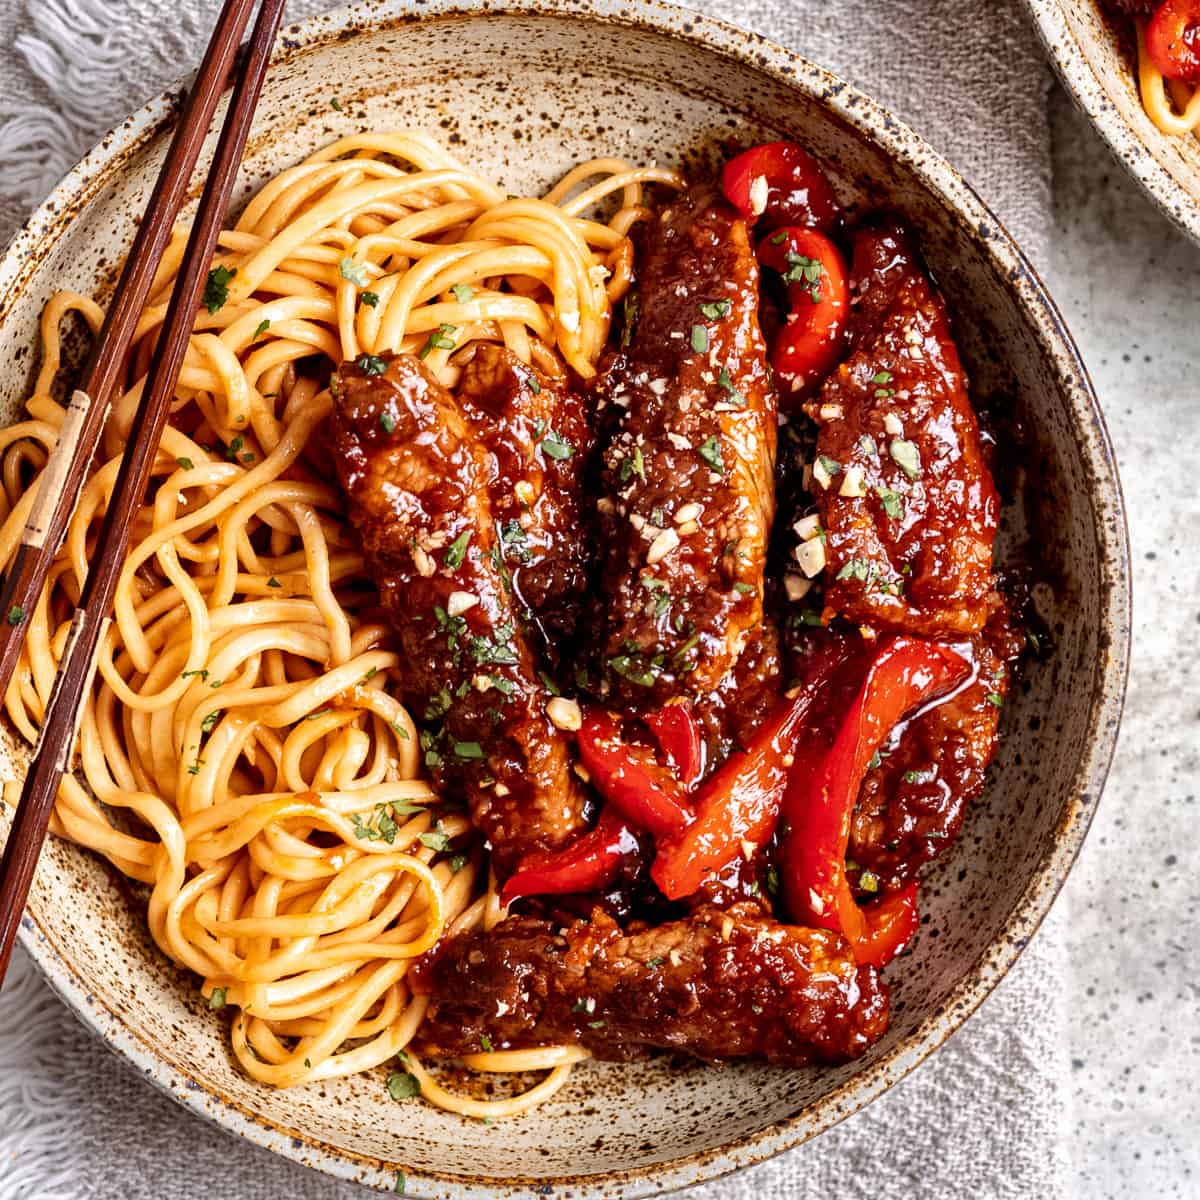 Shredded crispy chilli beef with noodles.